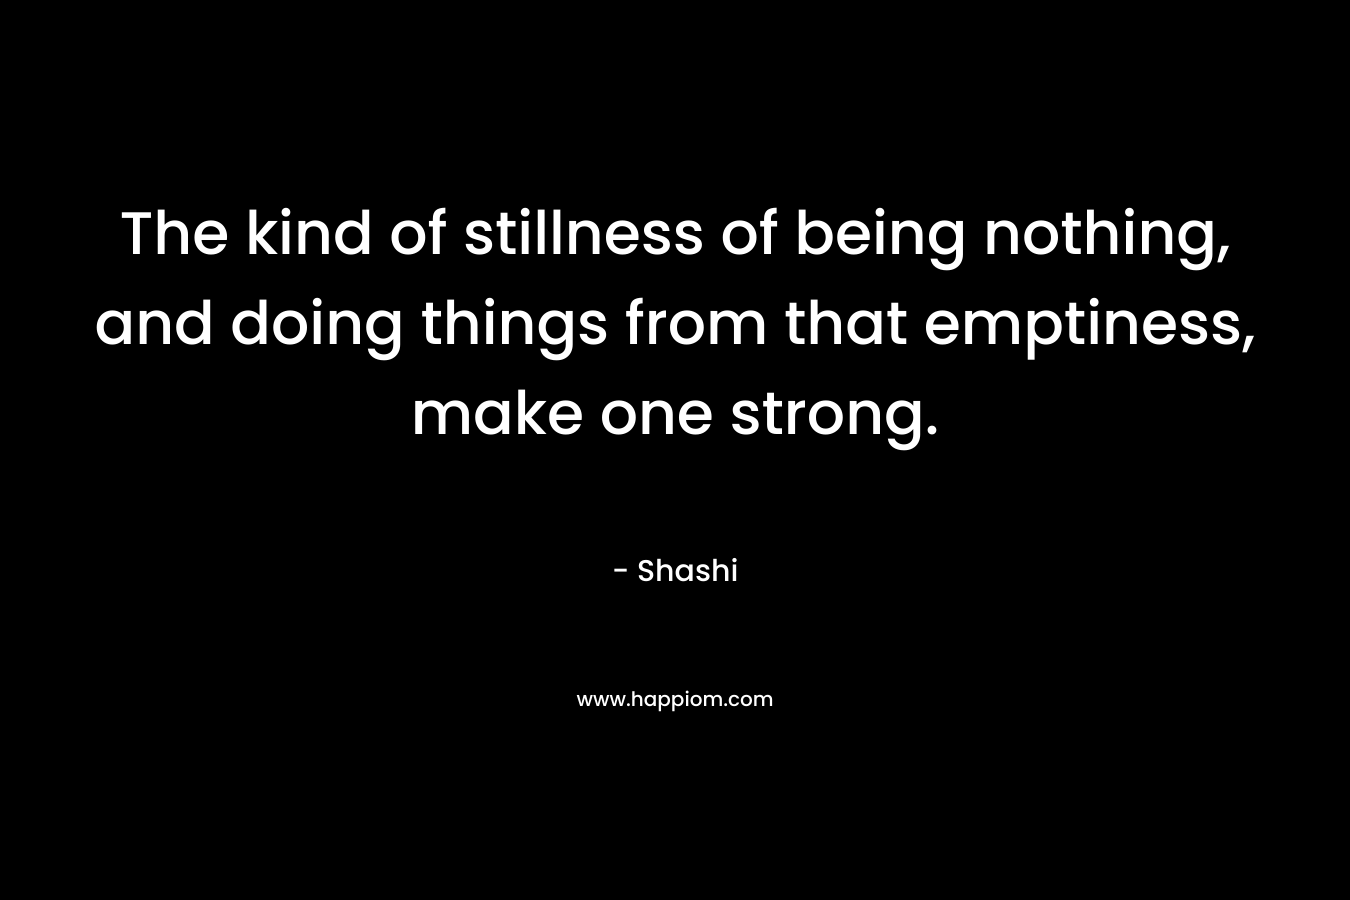 The kind of stillness of being nothing, and doing things from that emptiness, make one strong. – Shashi